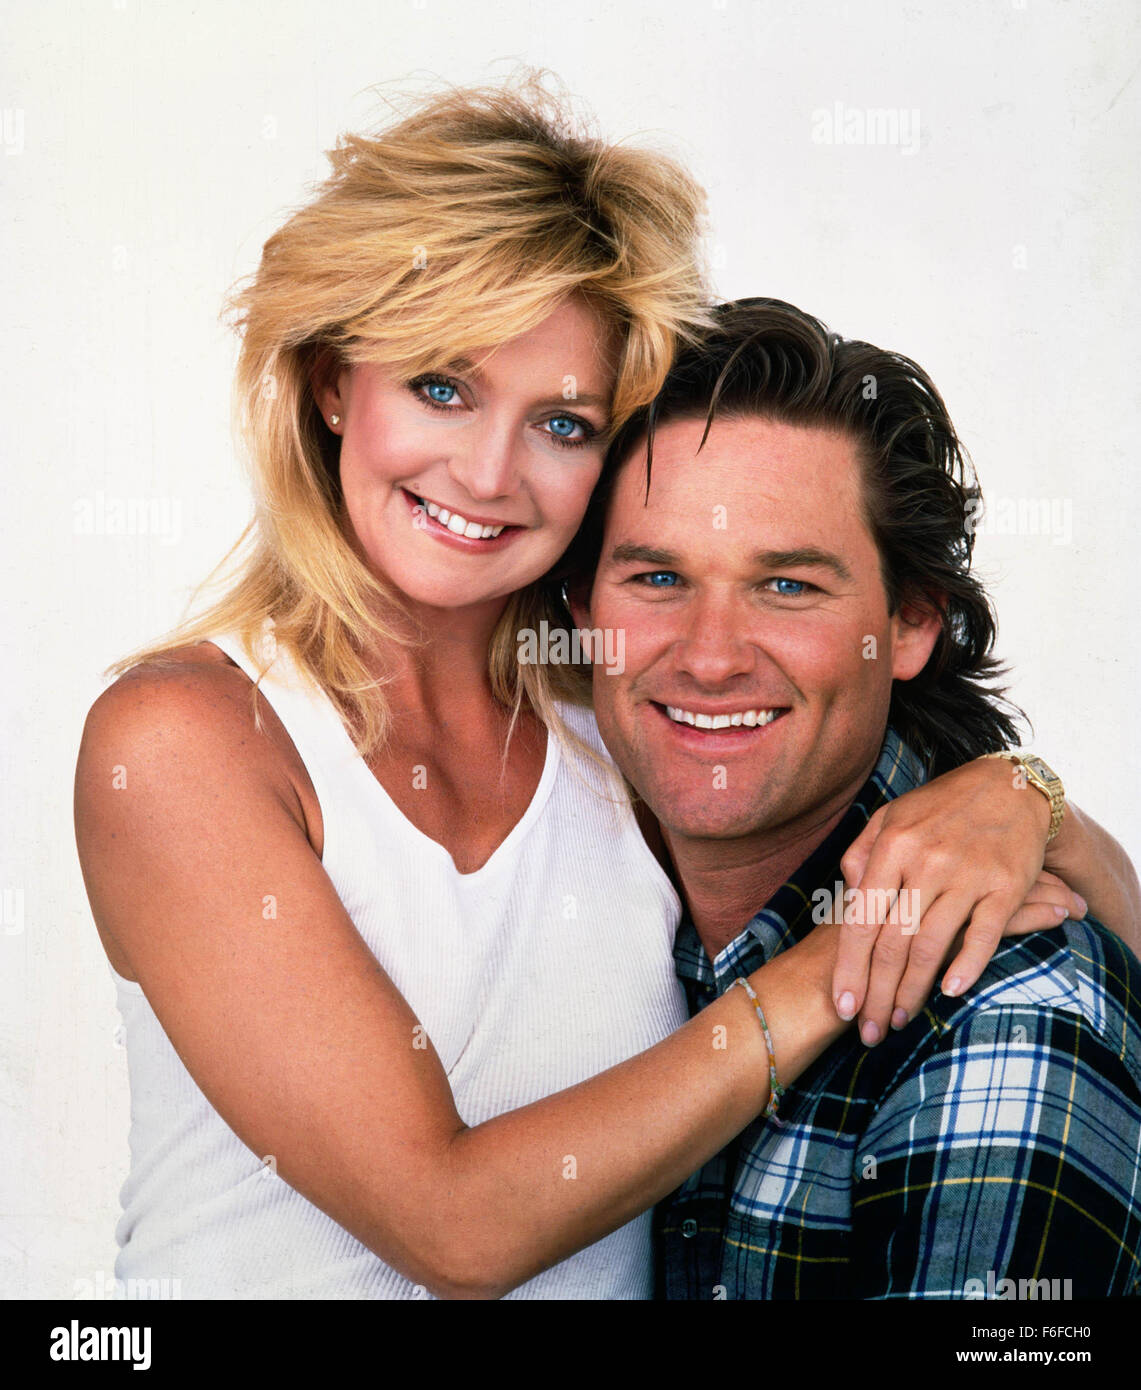 Dec 16, 1987; Hollywood, CA, USA; Pictured: GOLDIE HAWN as Joanna Stayton and KURT RUSSELL as Dean Proffitt from the 1987 film 'Overboard.' Stock Photo